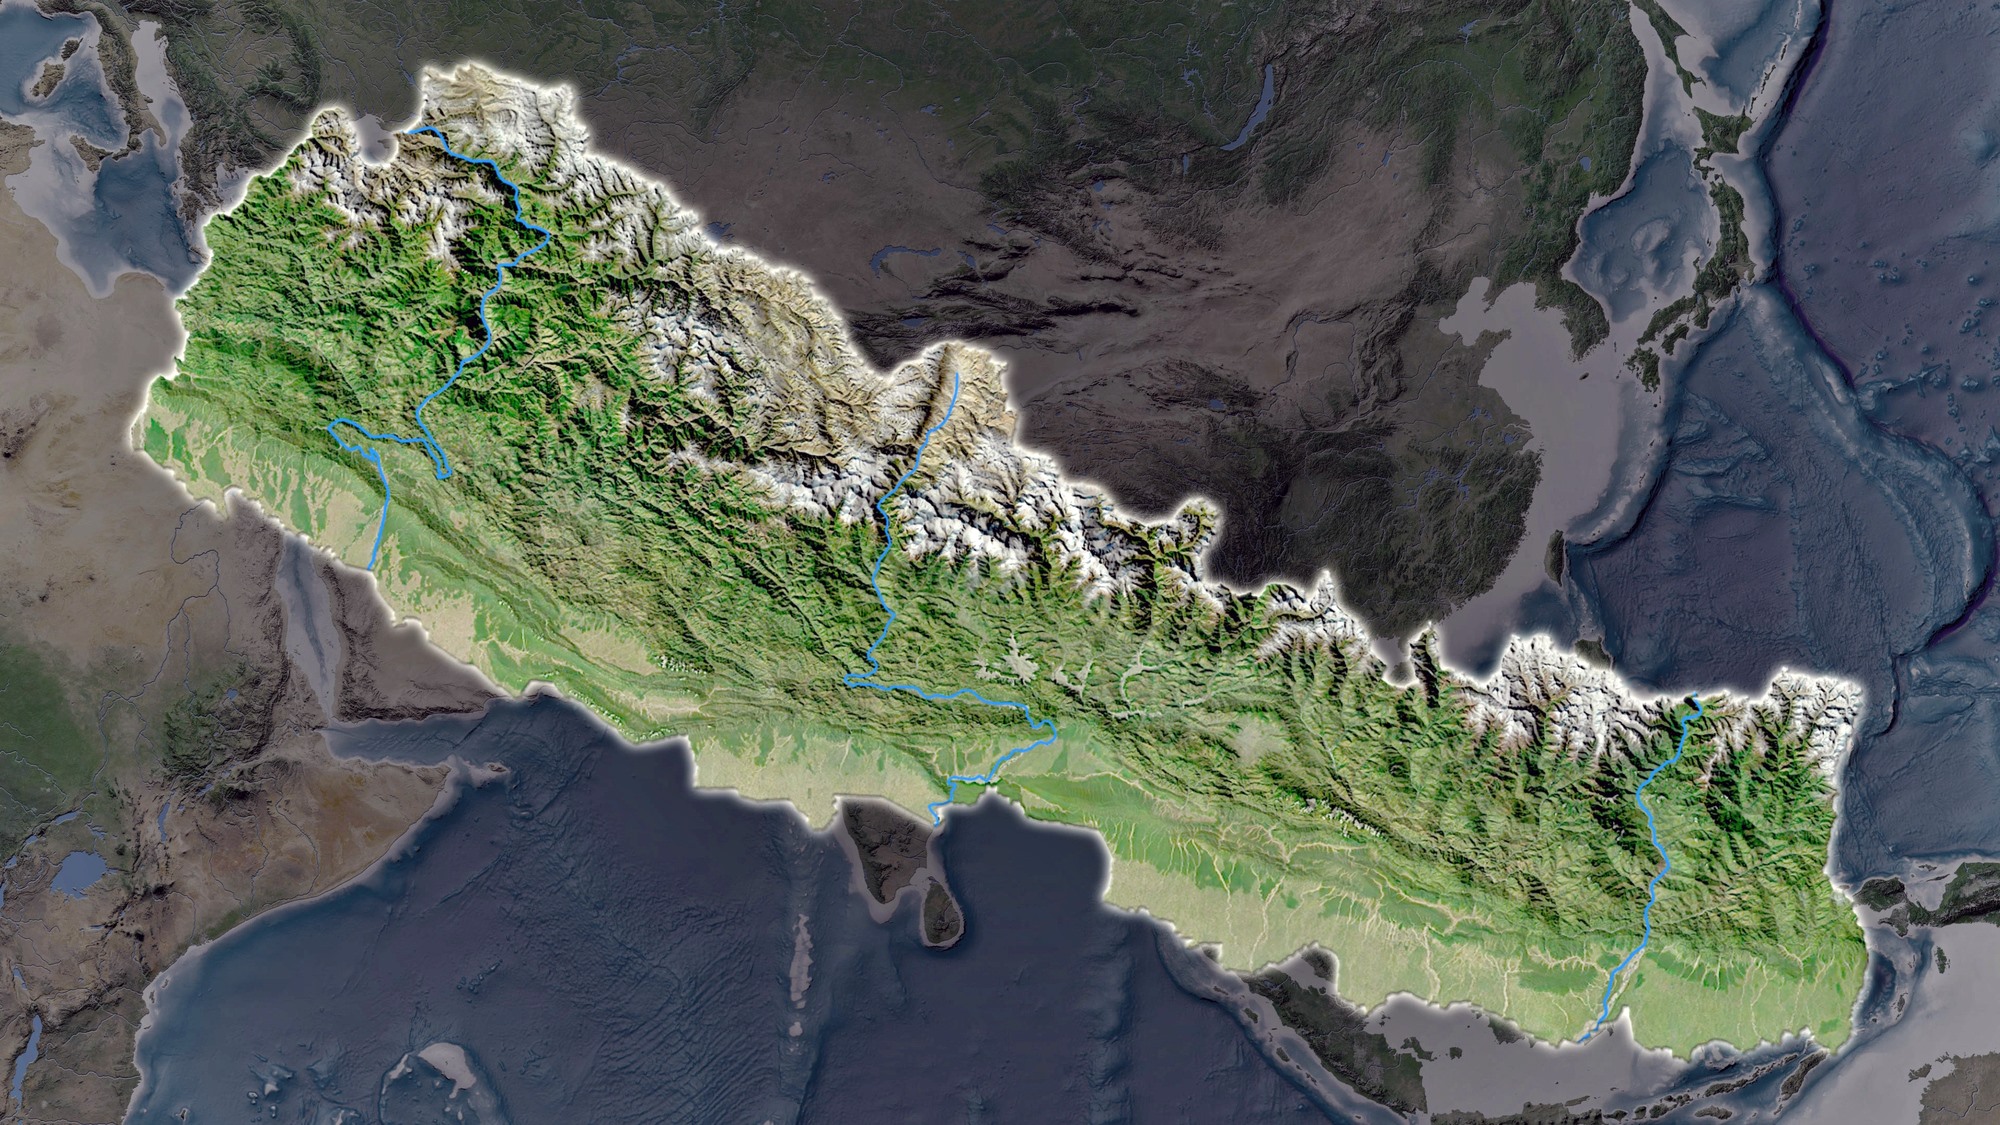 Elevation Map Of Nepal